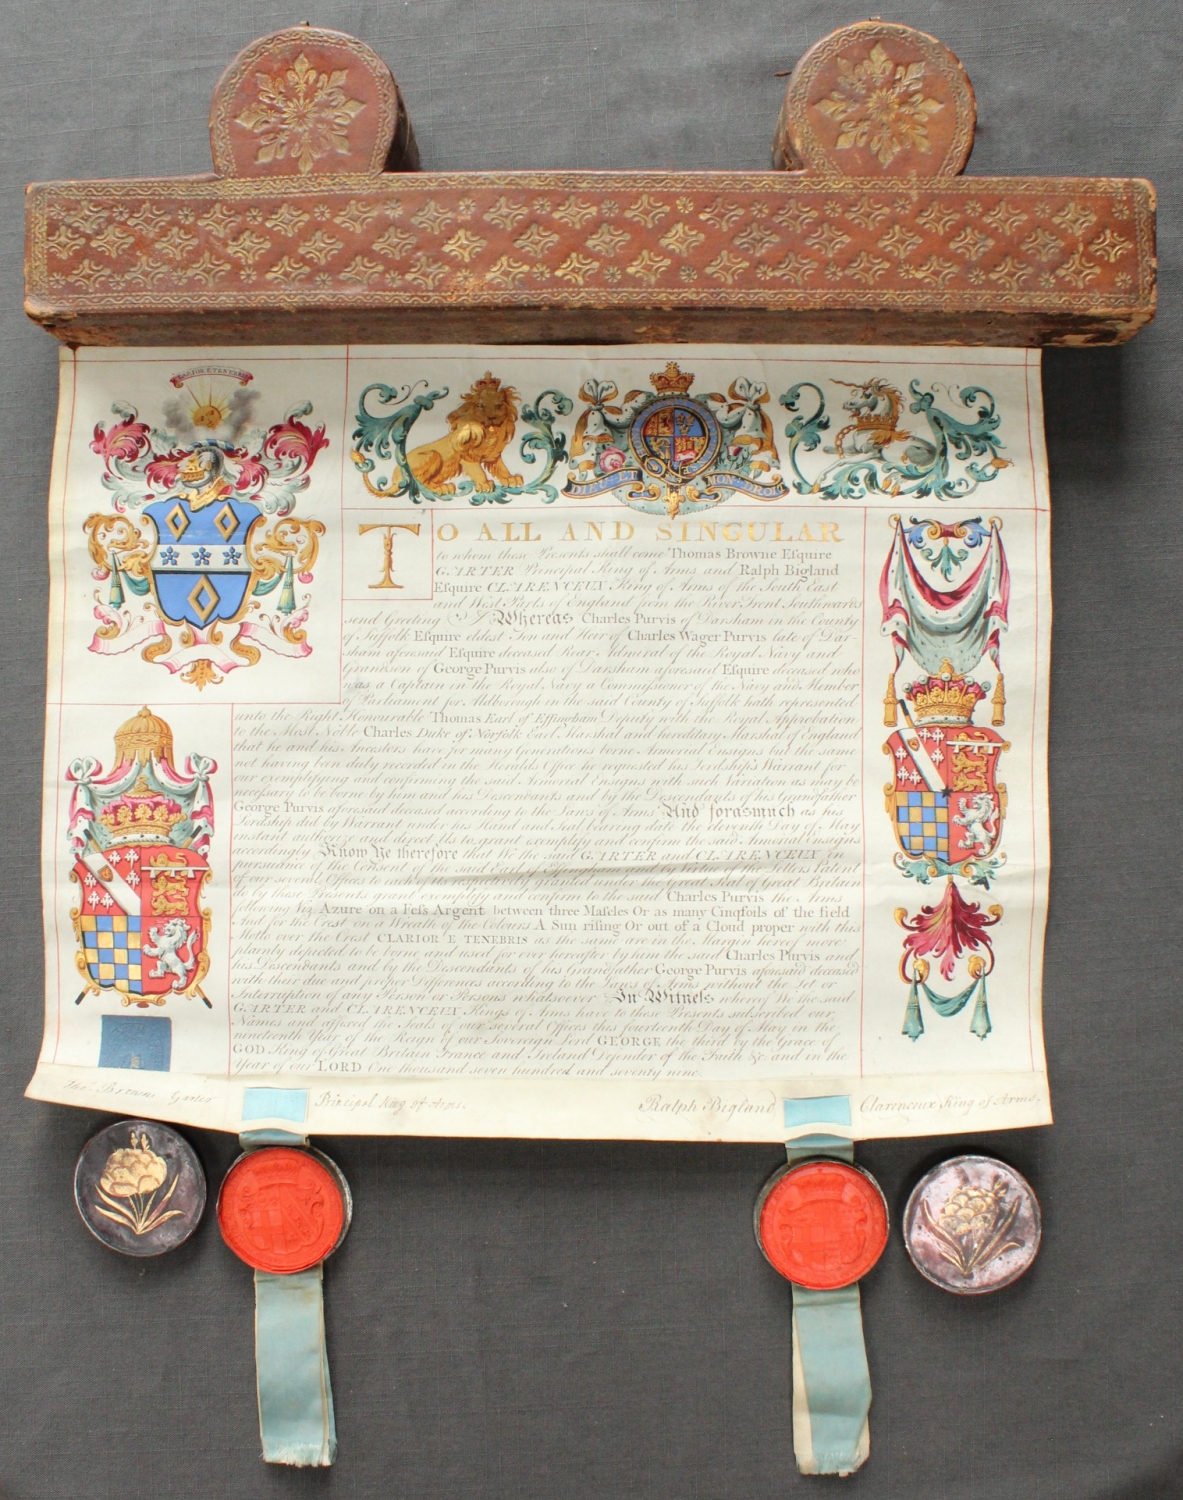 A Geo. III Grant of Arms